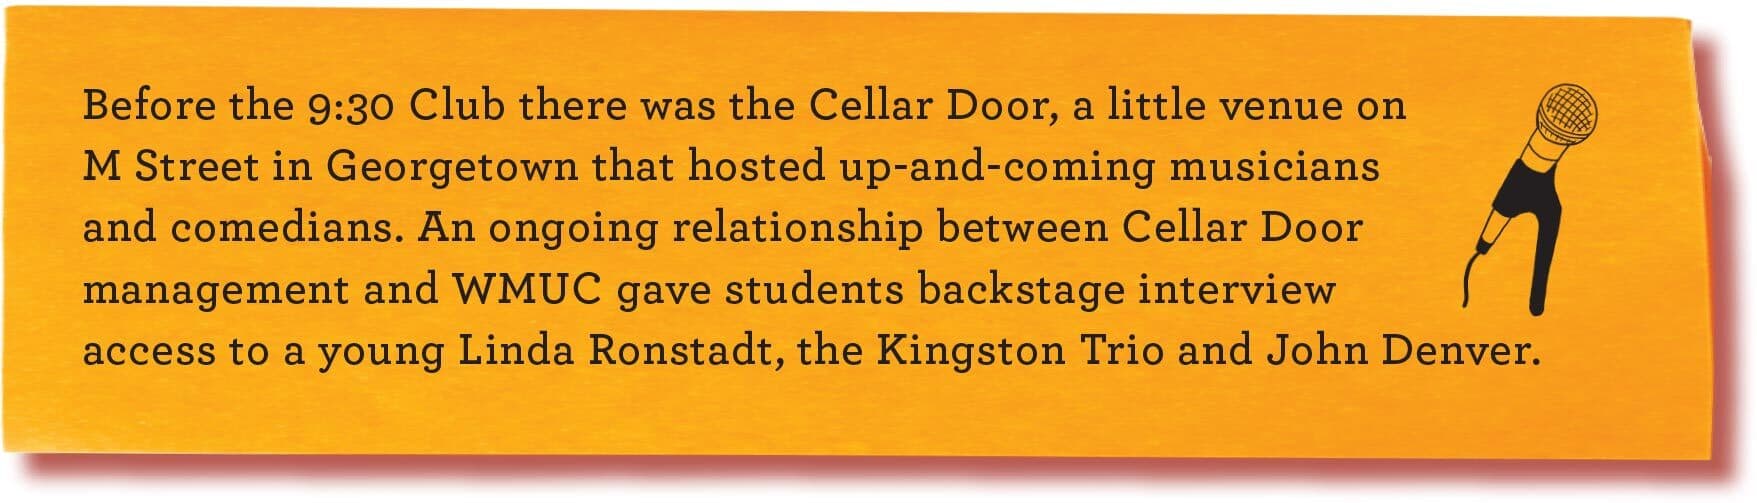 Before the 9:30 Club there was the Cellar Door, a little venue on M Street in Georgetown that hosted up-and-coming musicians and comedians. An ongoing relationship between Cellar Door management and WMUC gave students backstage interview access to a young Linda Ronstadt, the Kingston Trio and John Denver.